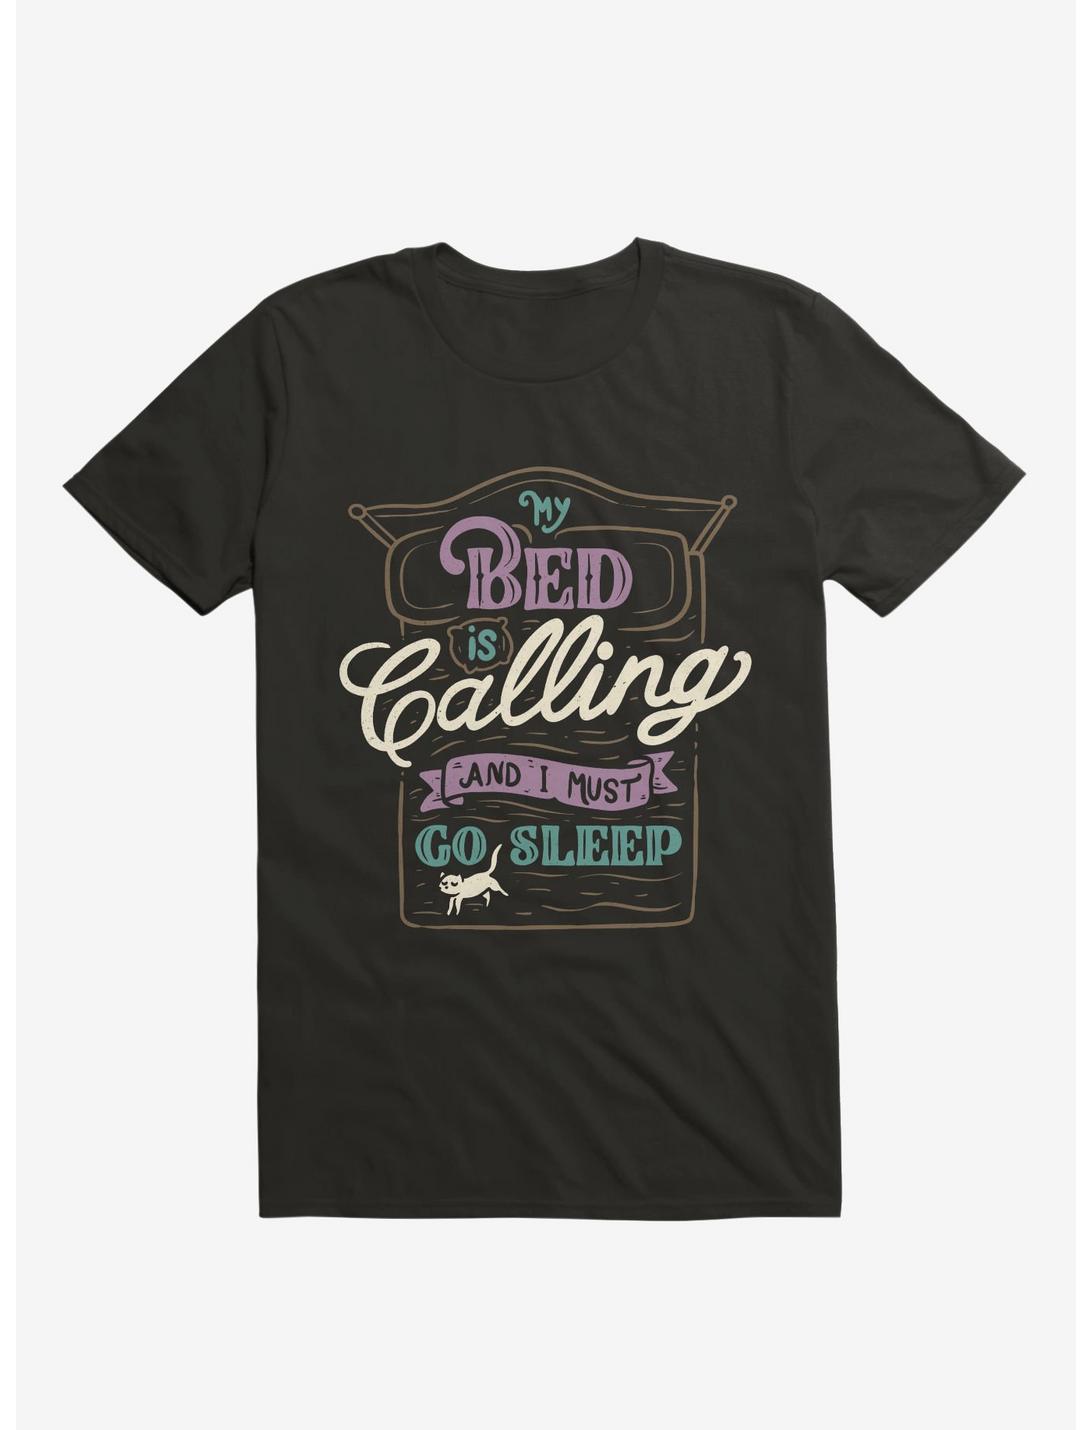 My Bed Is Calling And I Must Go Sleep Black T-Shirt, BLACK, hi-res